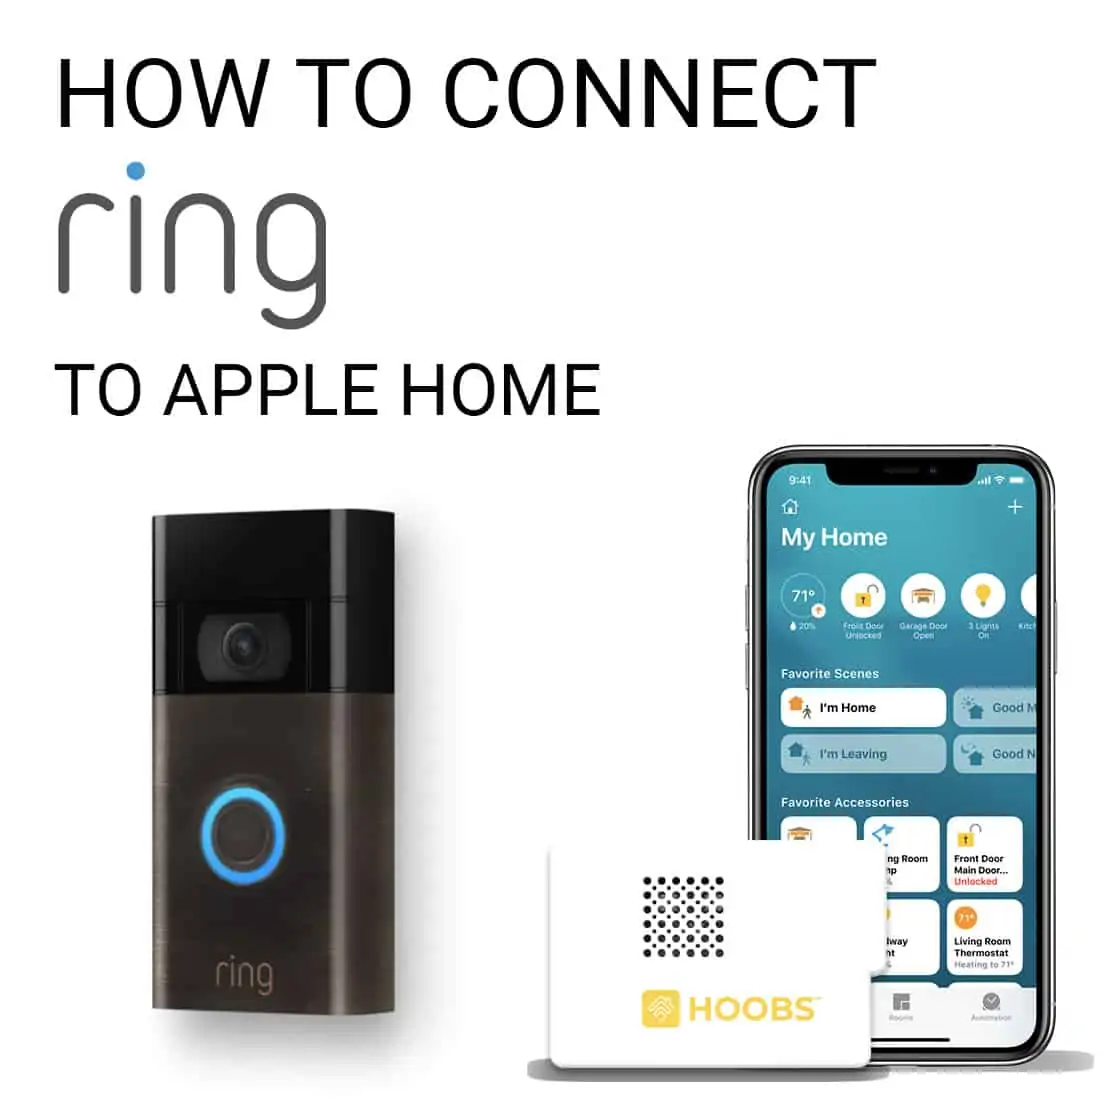 Ring Connect